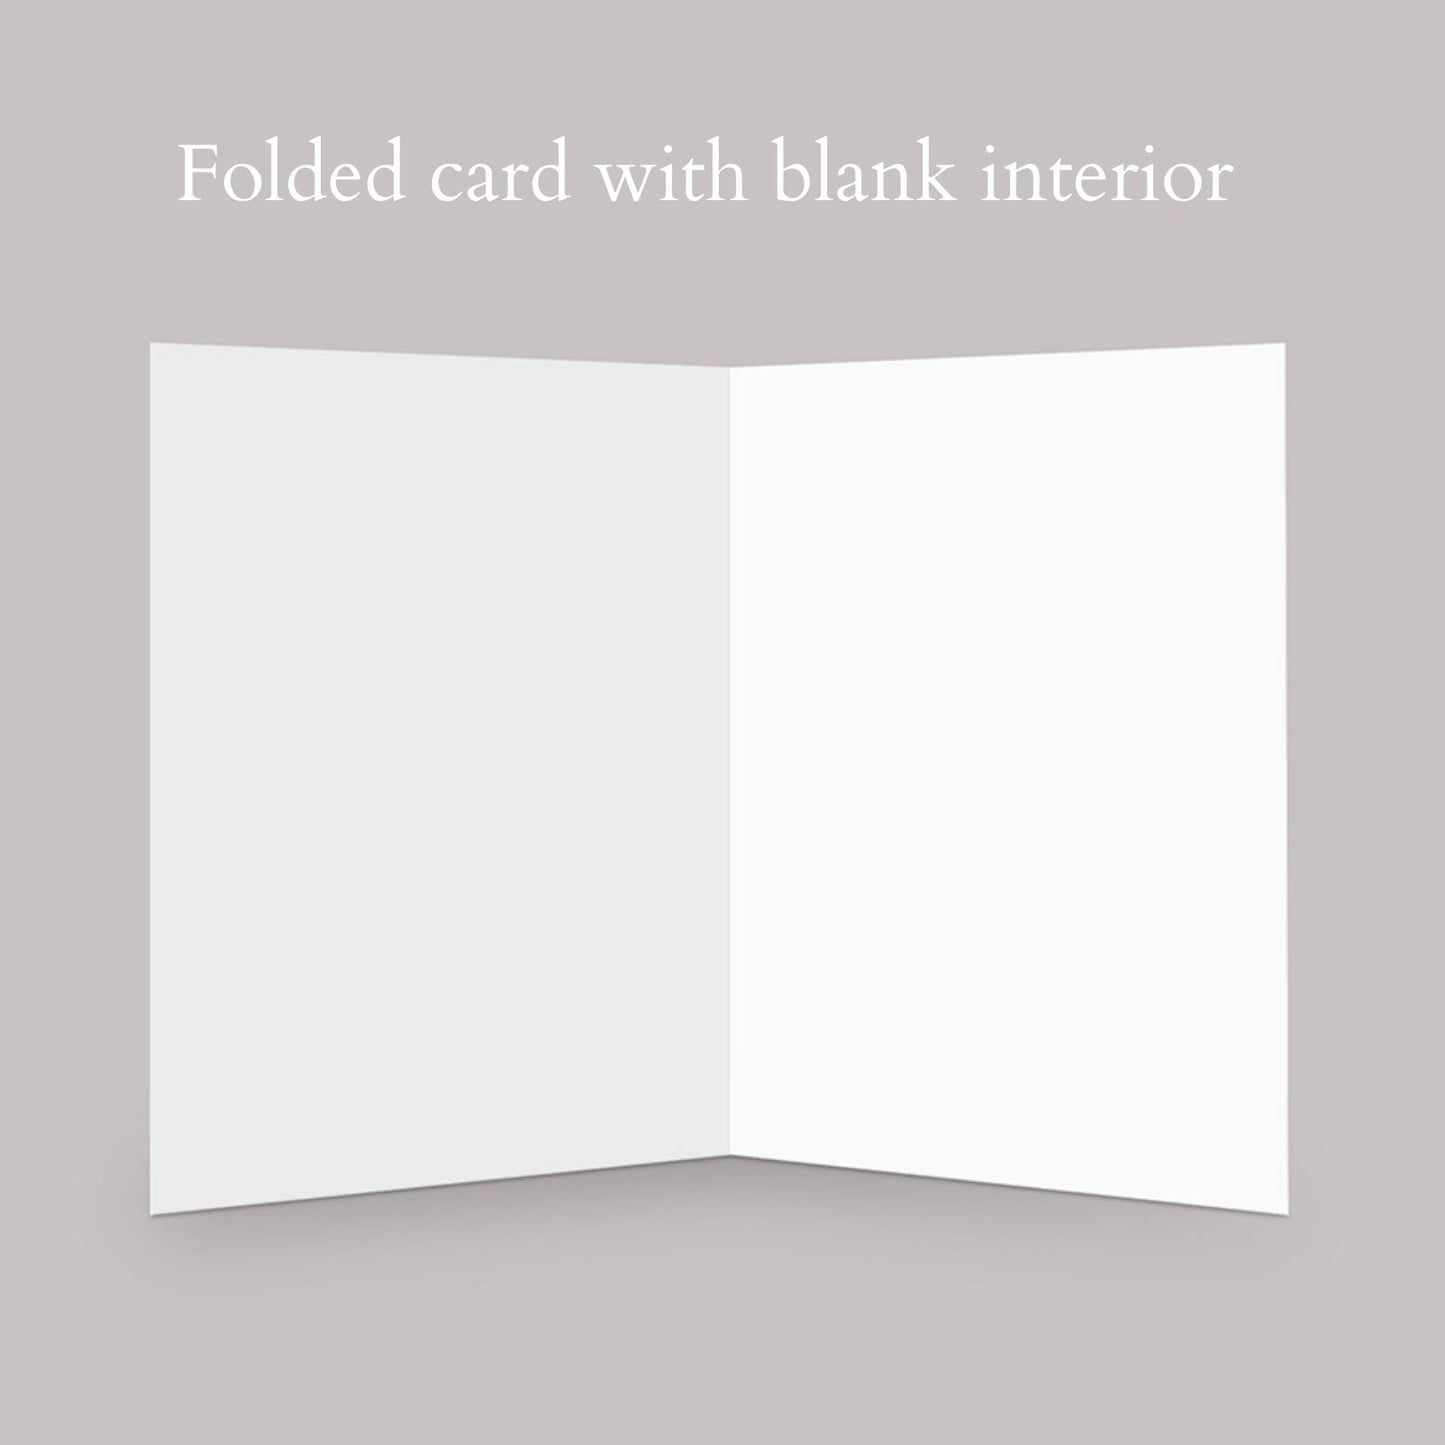 Blank interior for each greeting card so you have space to fill with a special hand-written note